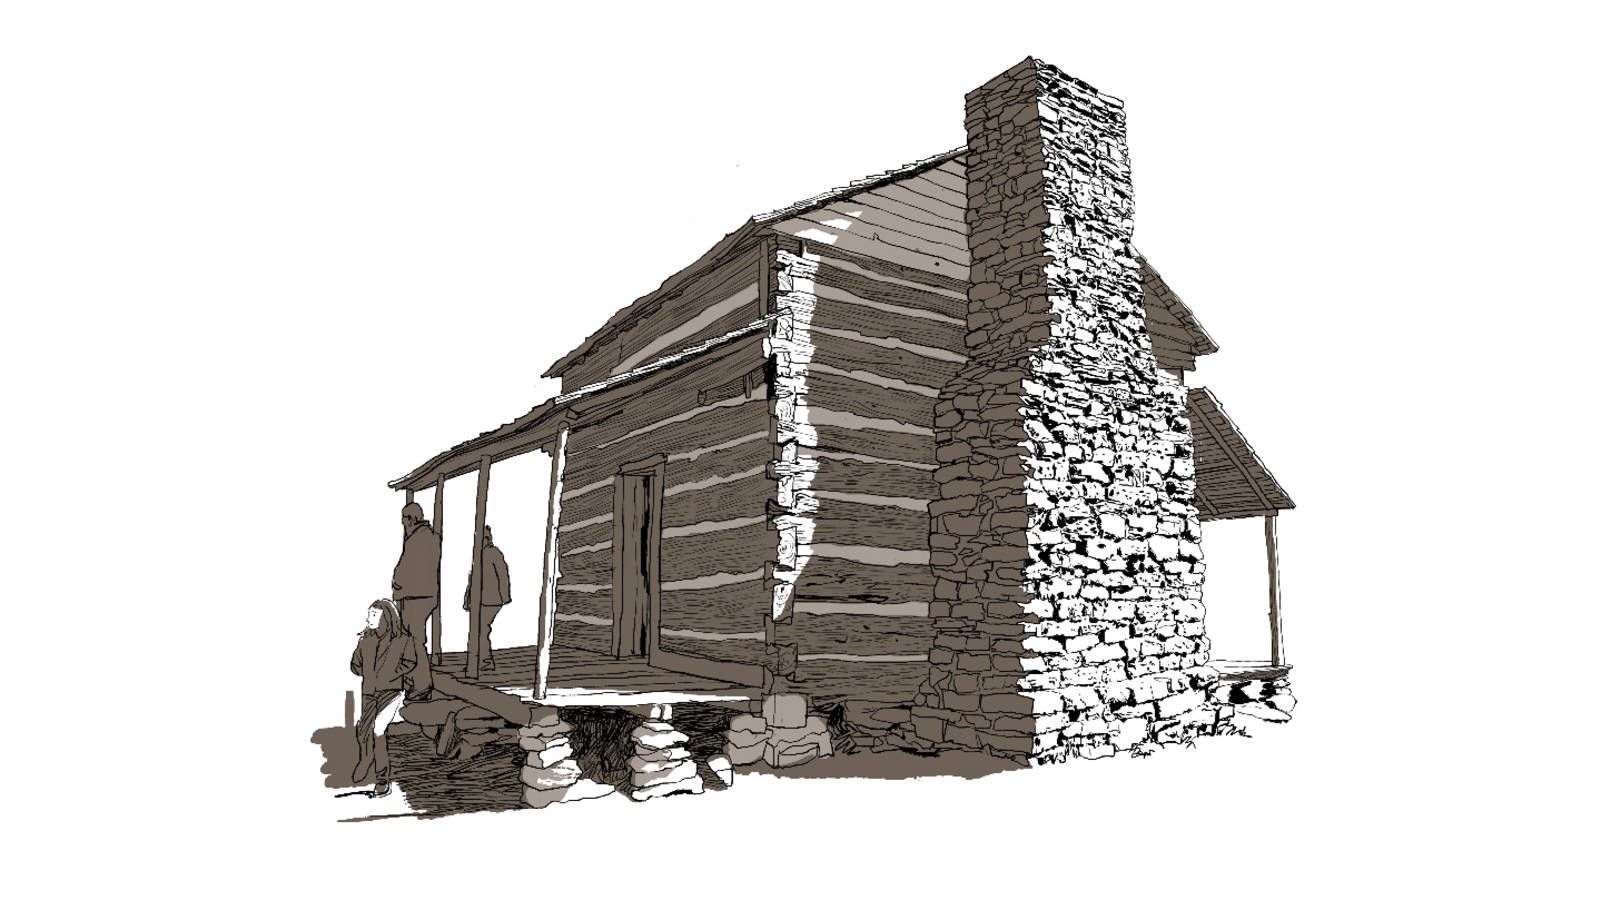 <p>The John Oliver cabin is thought to be the oldest of the over 80 structures in the park. No frills here: The immense amount of labor required to build the simplest dwelling is there for all to see. </p>